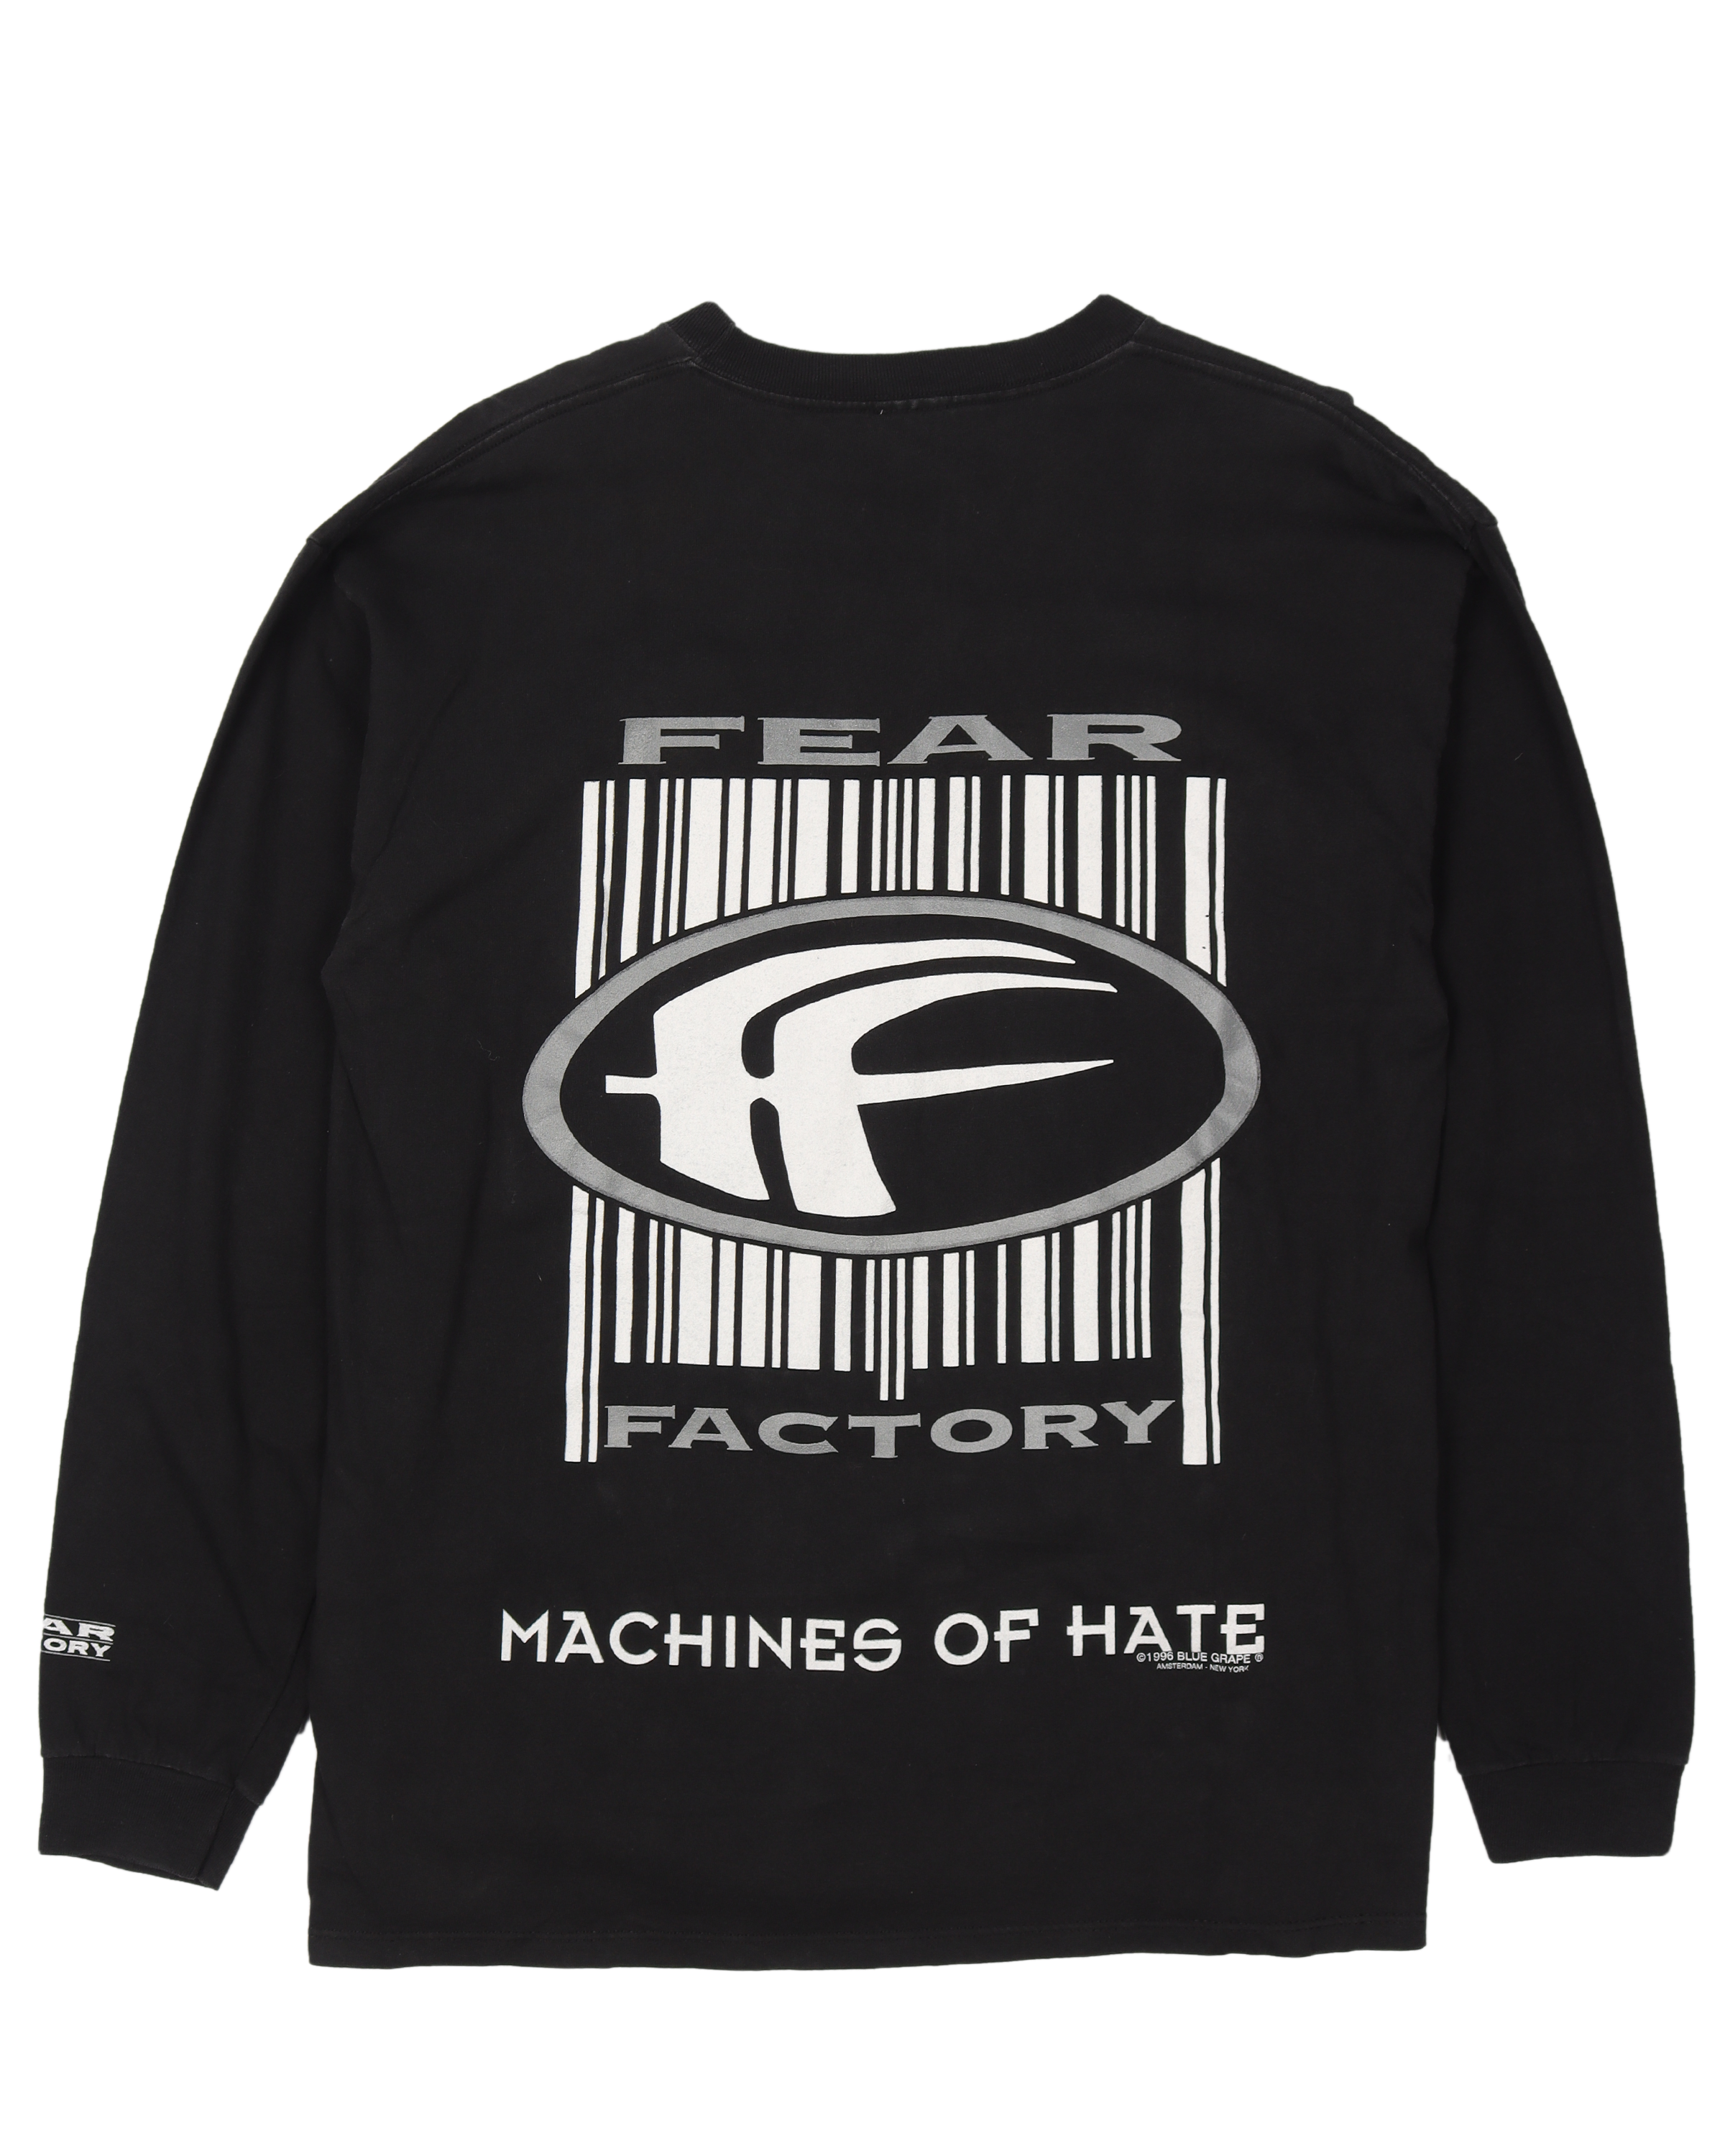 Fear Factory "Machines of Hate" L/S T-Shirt